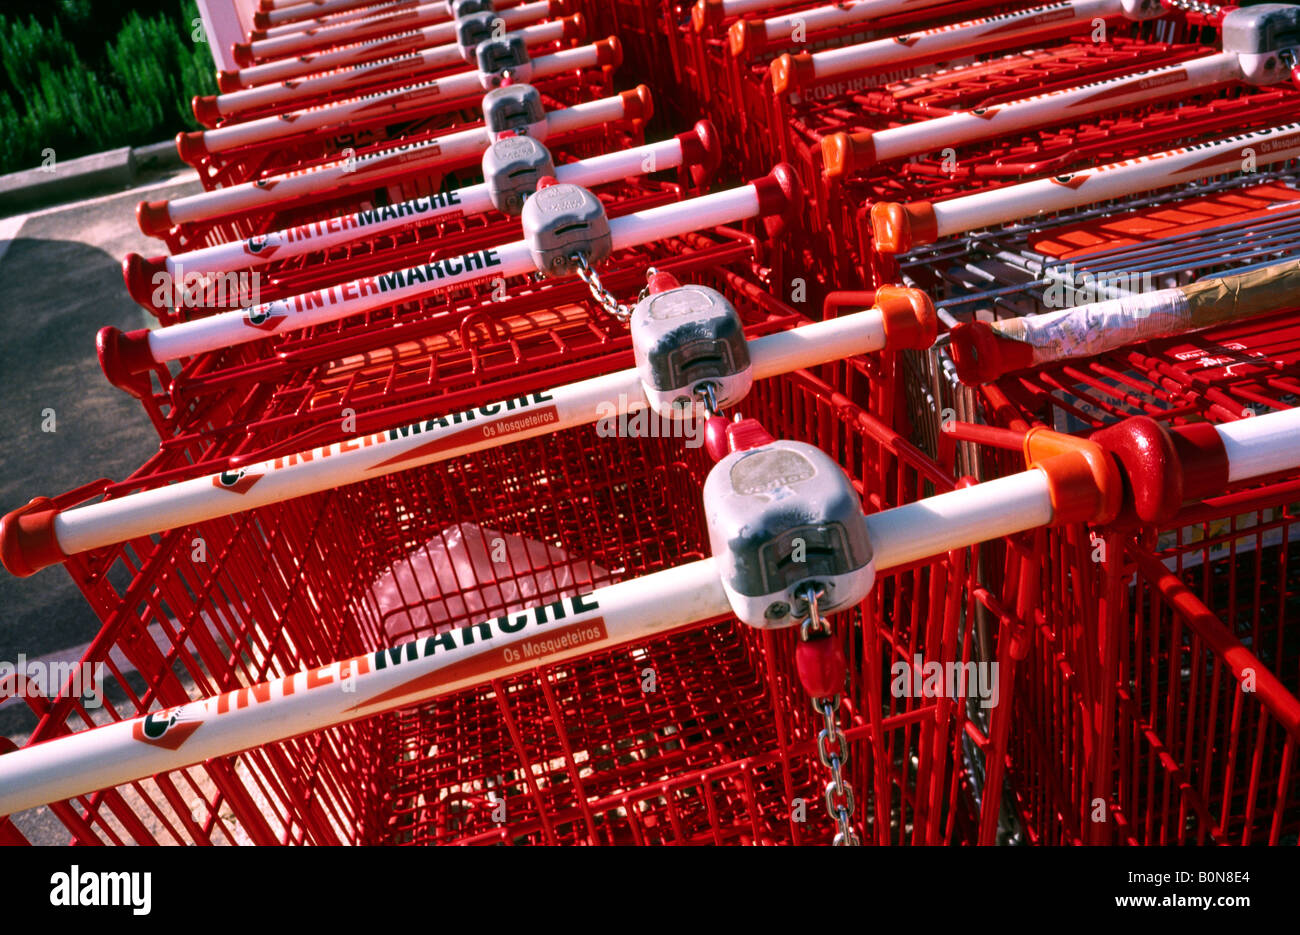 Oct 23, 2003 - Shopping trolleys outside Intermarche supermarket in the Portugese town of Lagos. Stock Photo